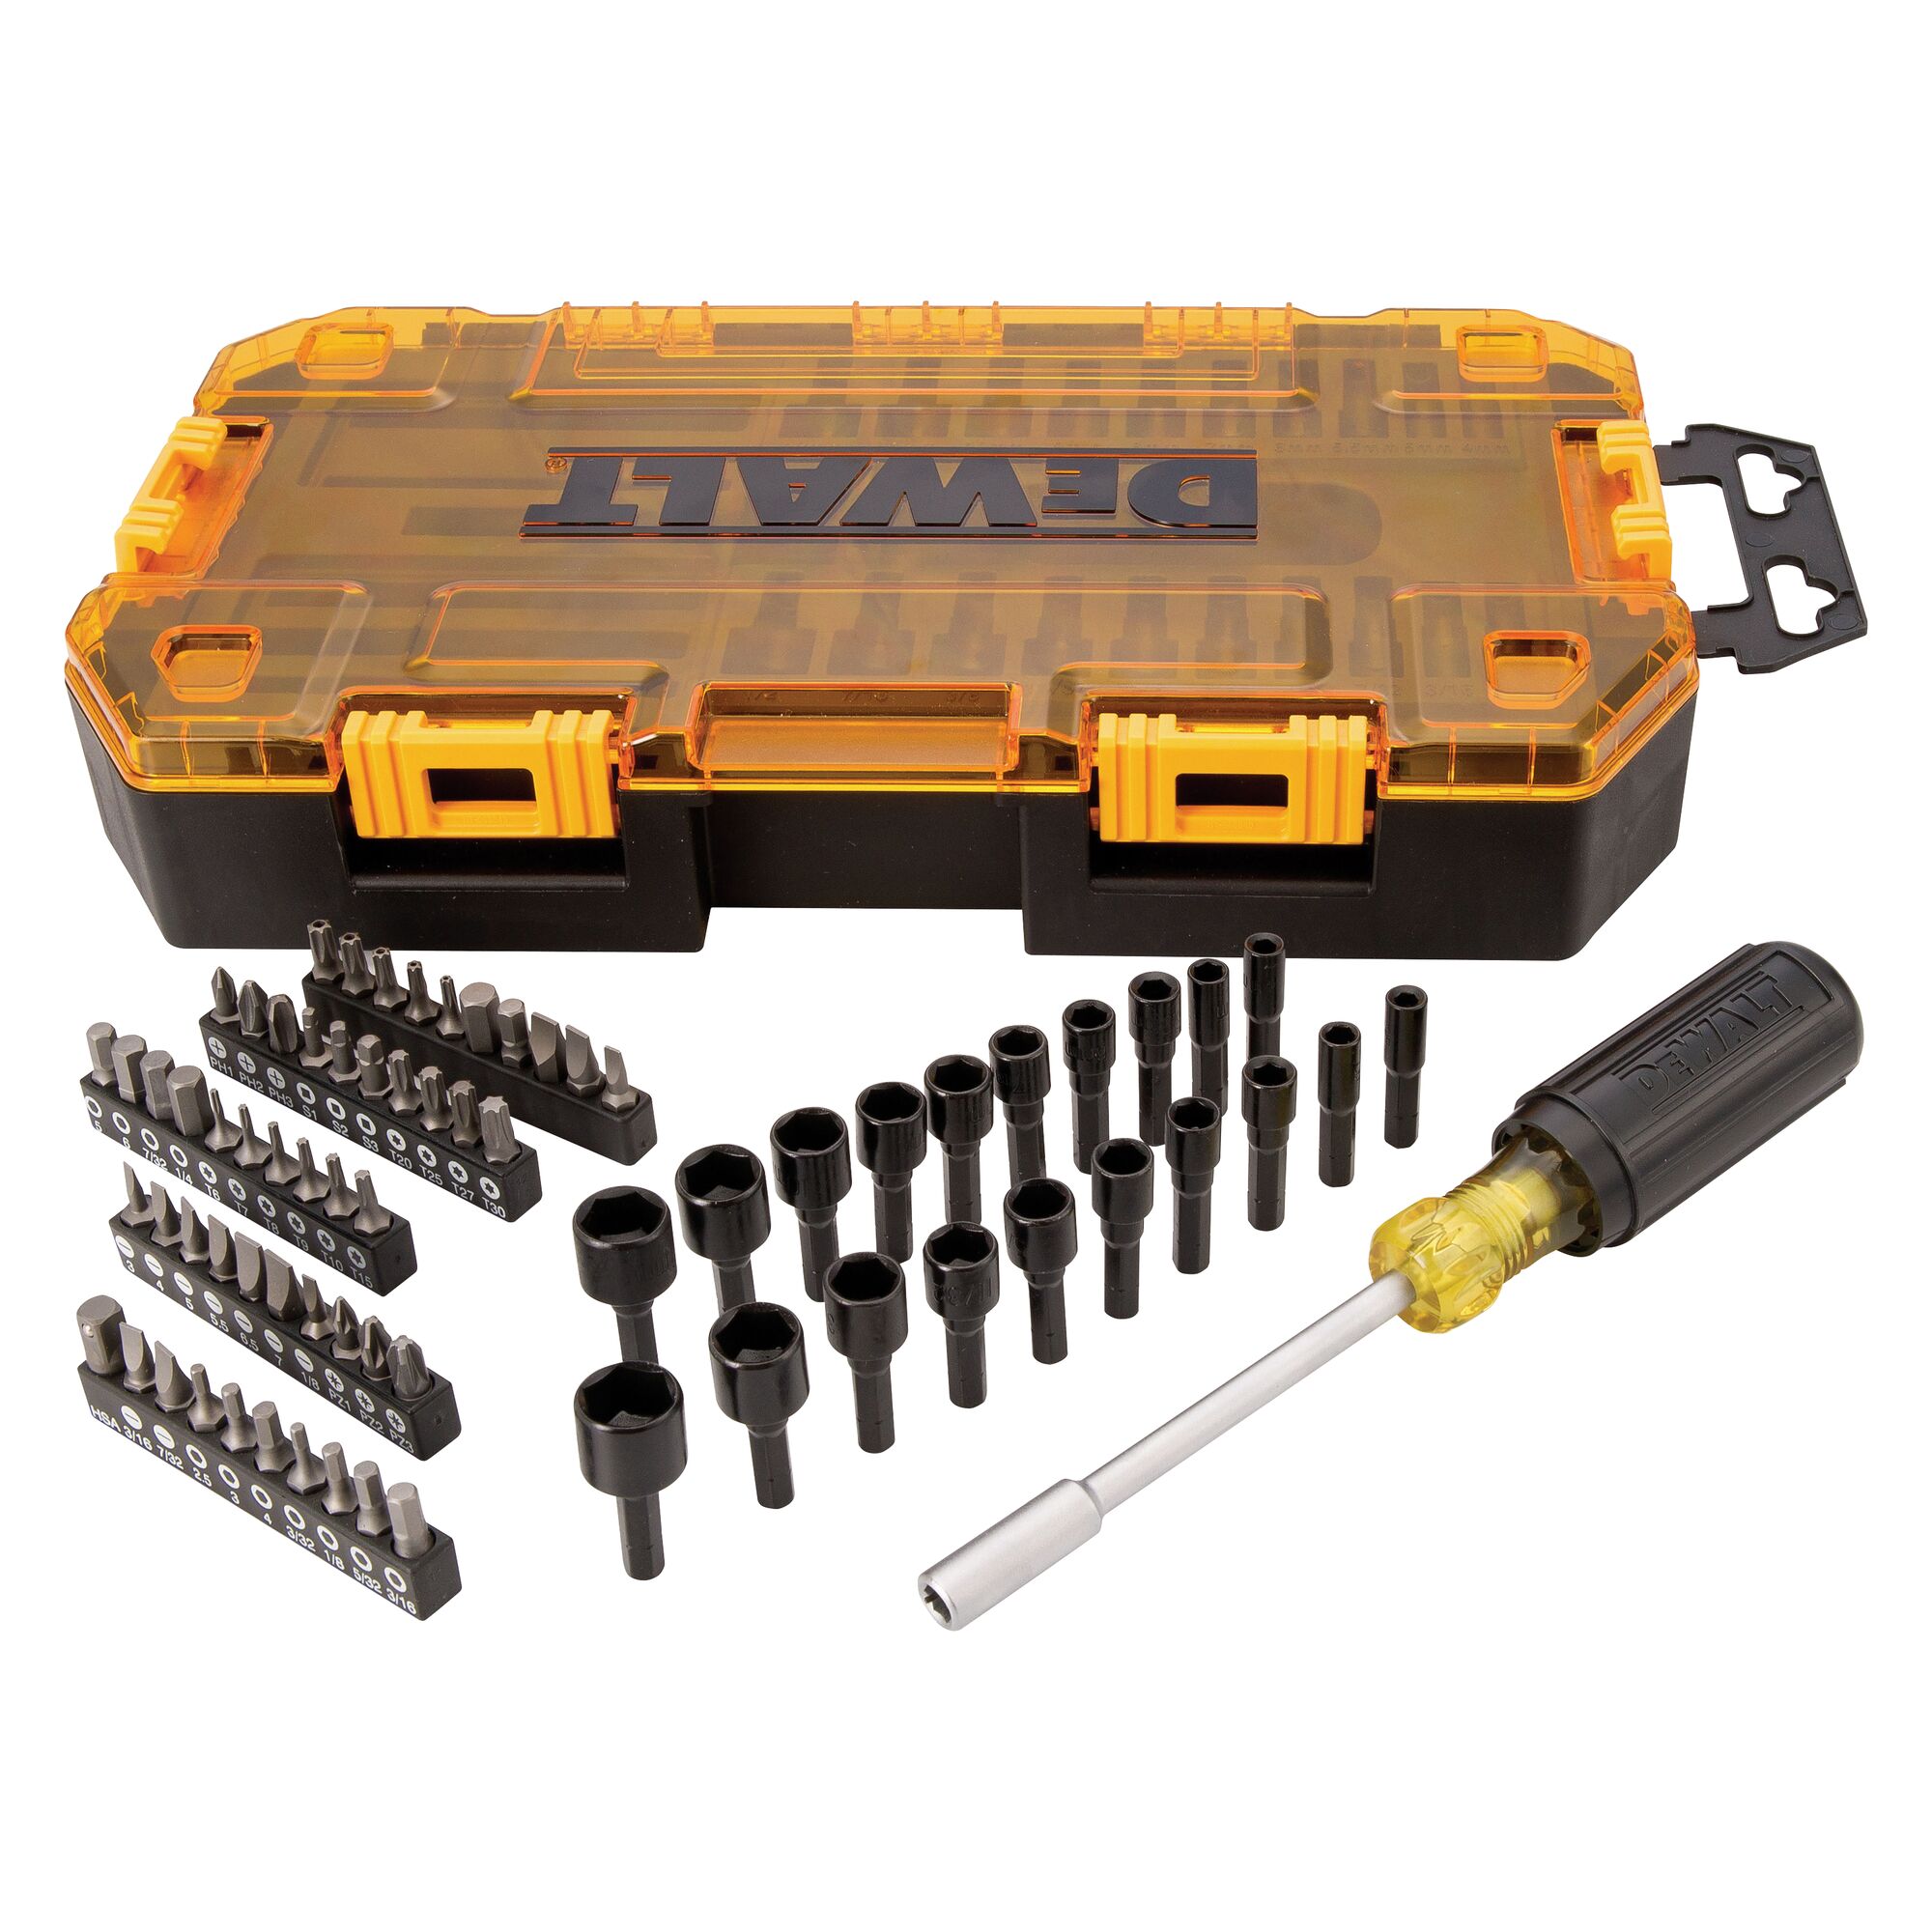 All-Purpose Household Mini Tool Kit with Basic Tools 65-Piece - United  States